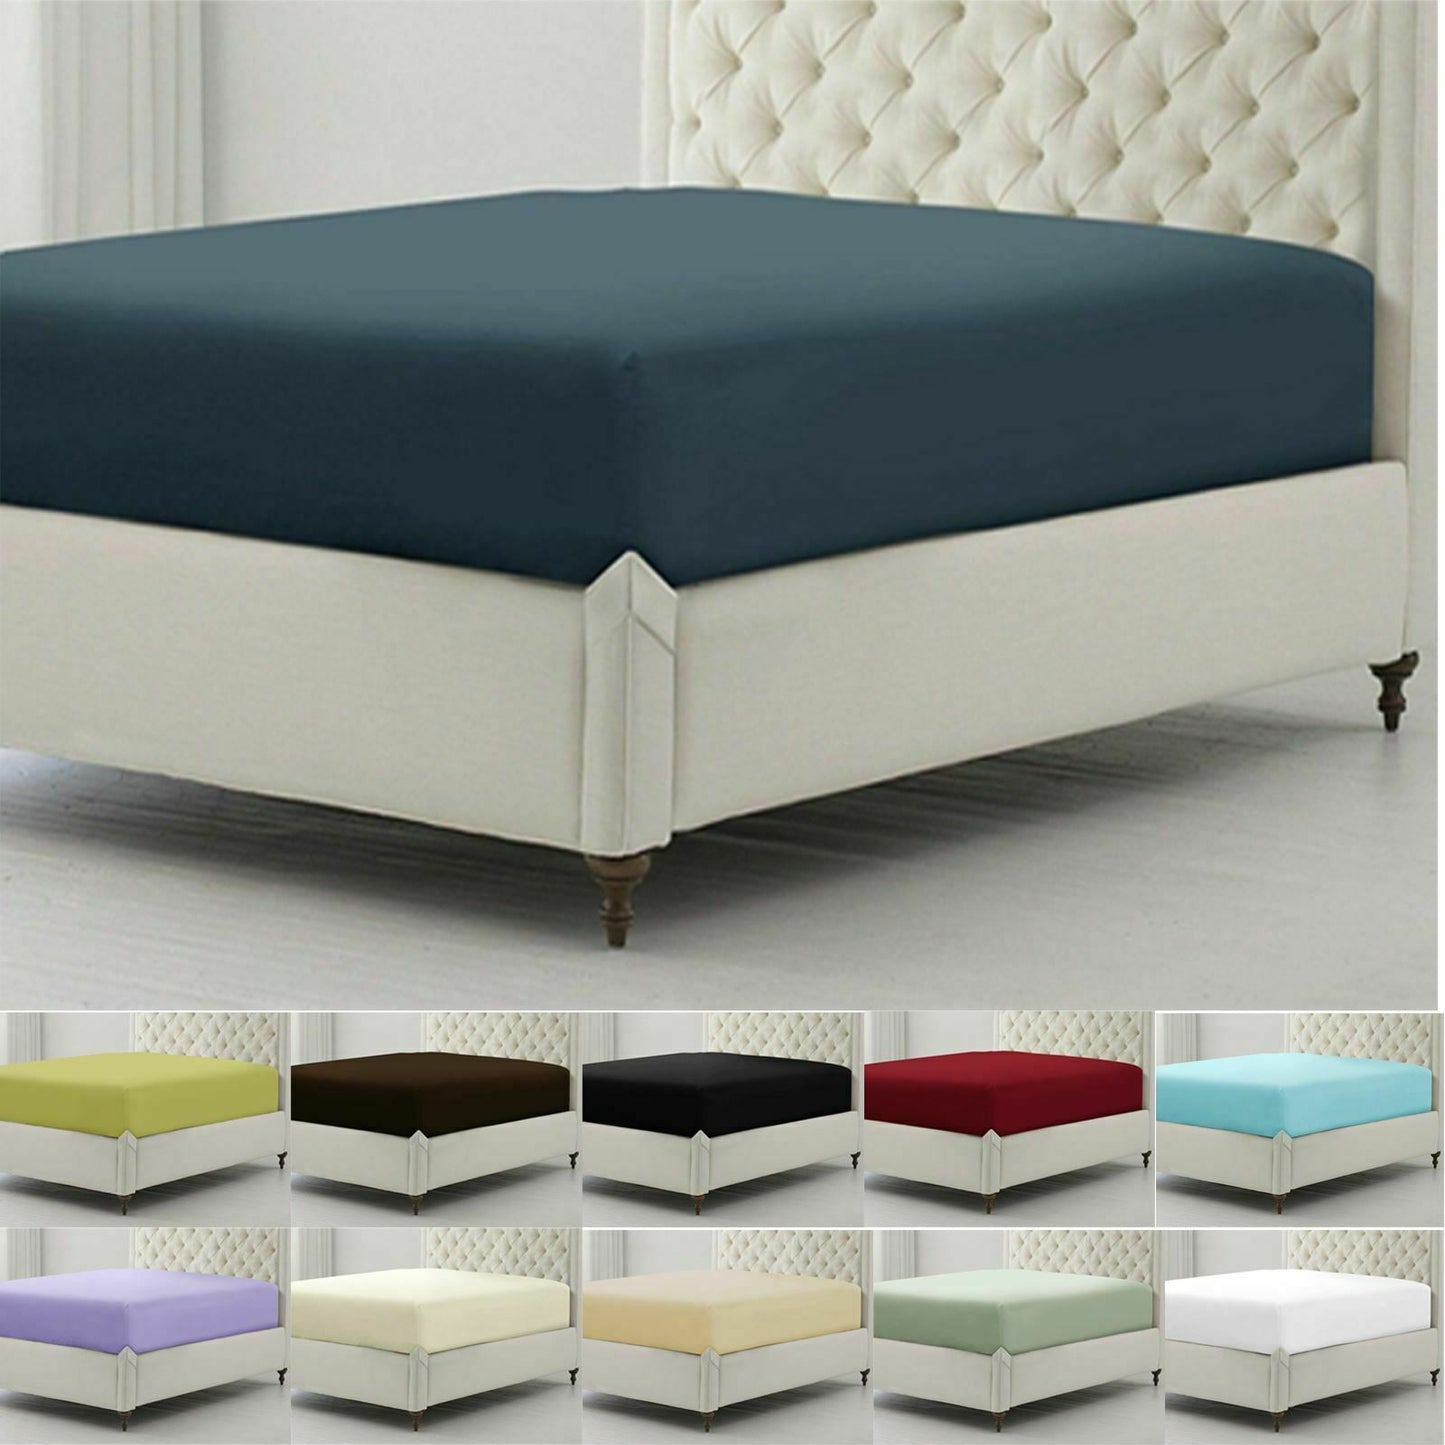 Egyptian Percale Hotel Quality 200 Thread Count Fitted Bed Sheet - TheComfortshop.co.ukBed Sheets0721718962281thecomfortshopTheComfortshop.co.ukPink T200 Fitted Sheet DoublePinkDoubleEgyptian Percale Hotel Quality 200 Thread Count Fitted Bed Sheet - TheComfortshop.co.uk